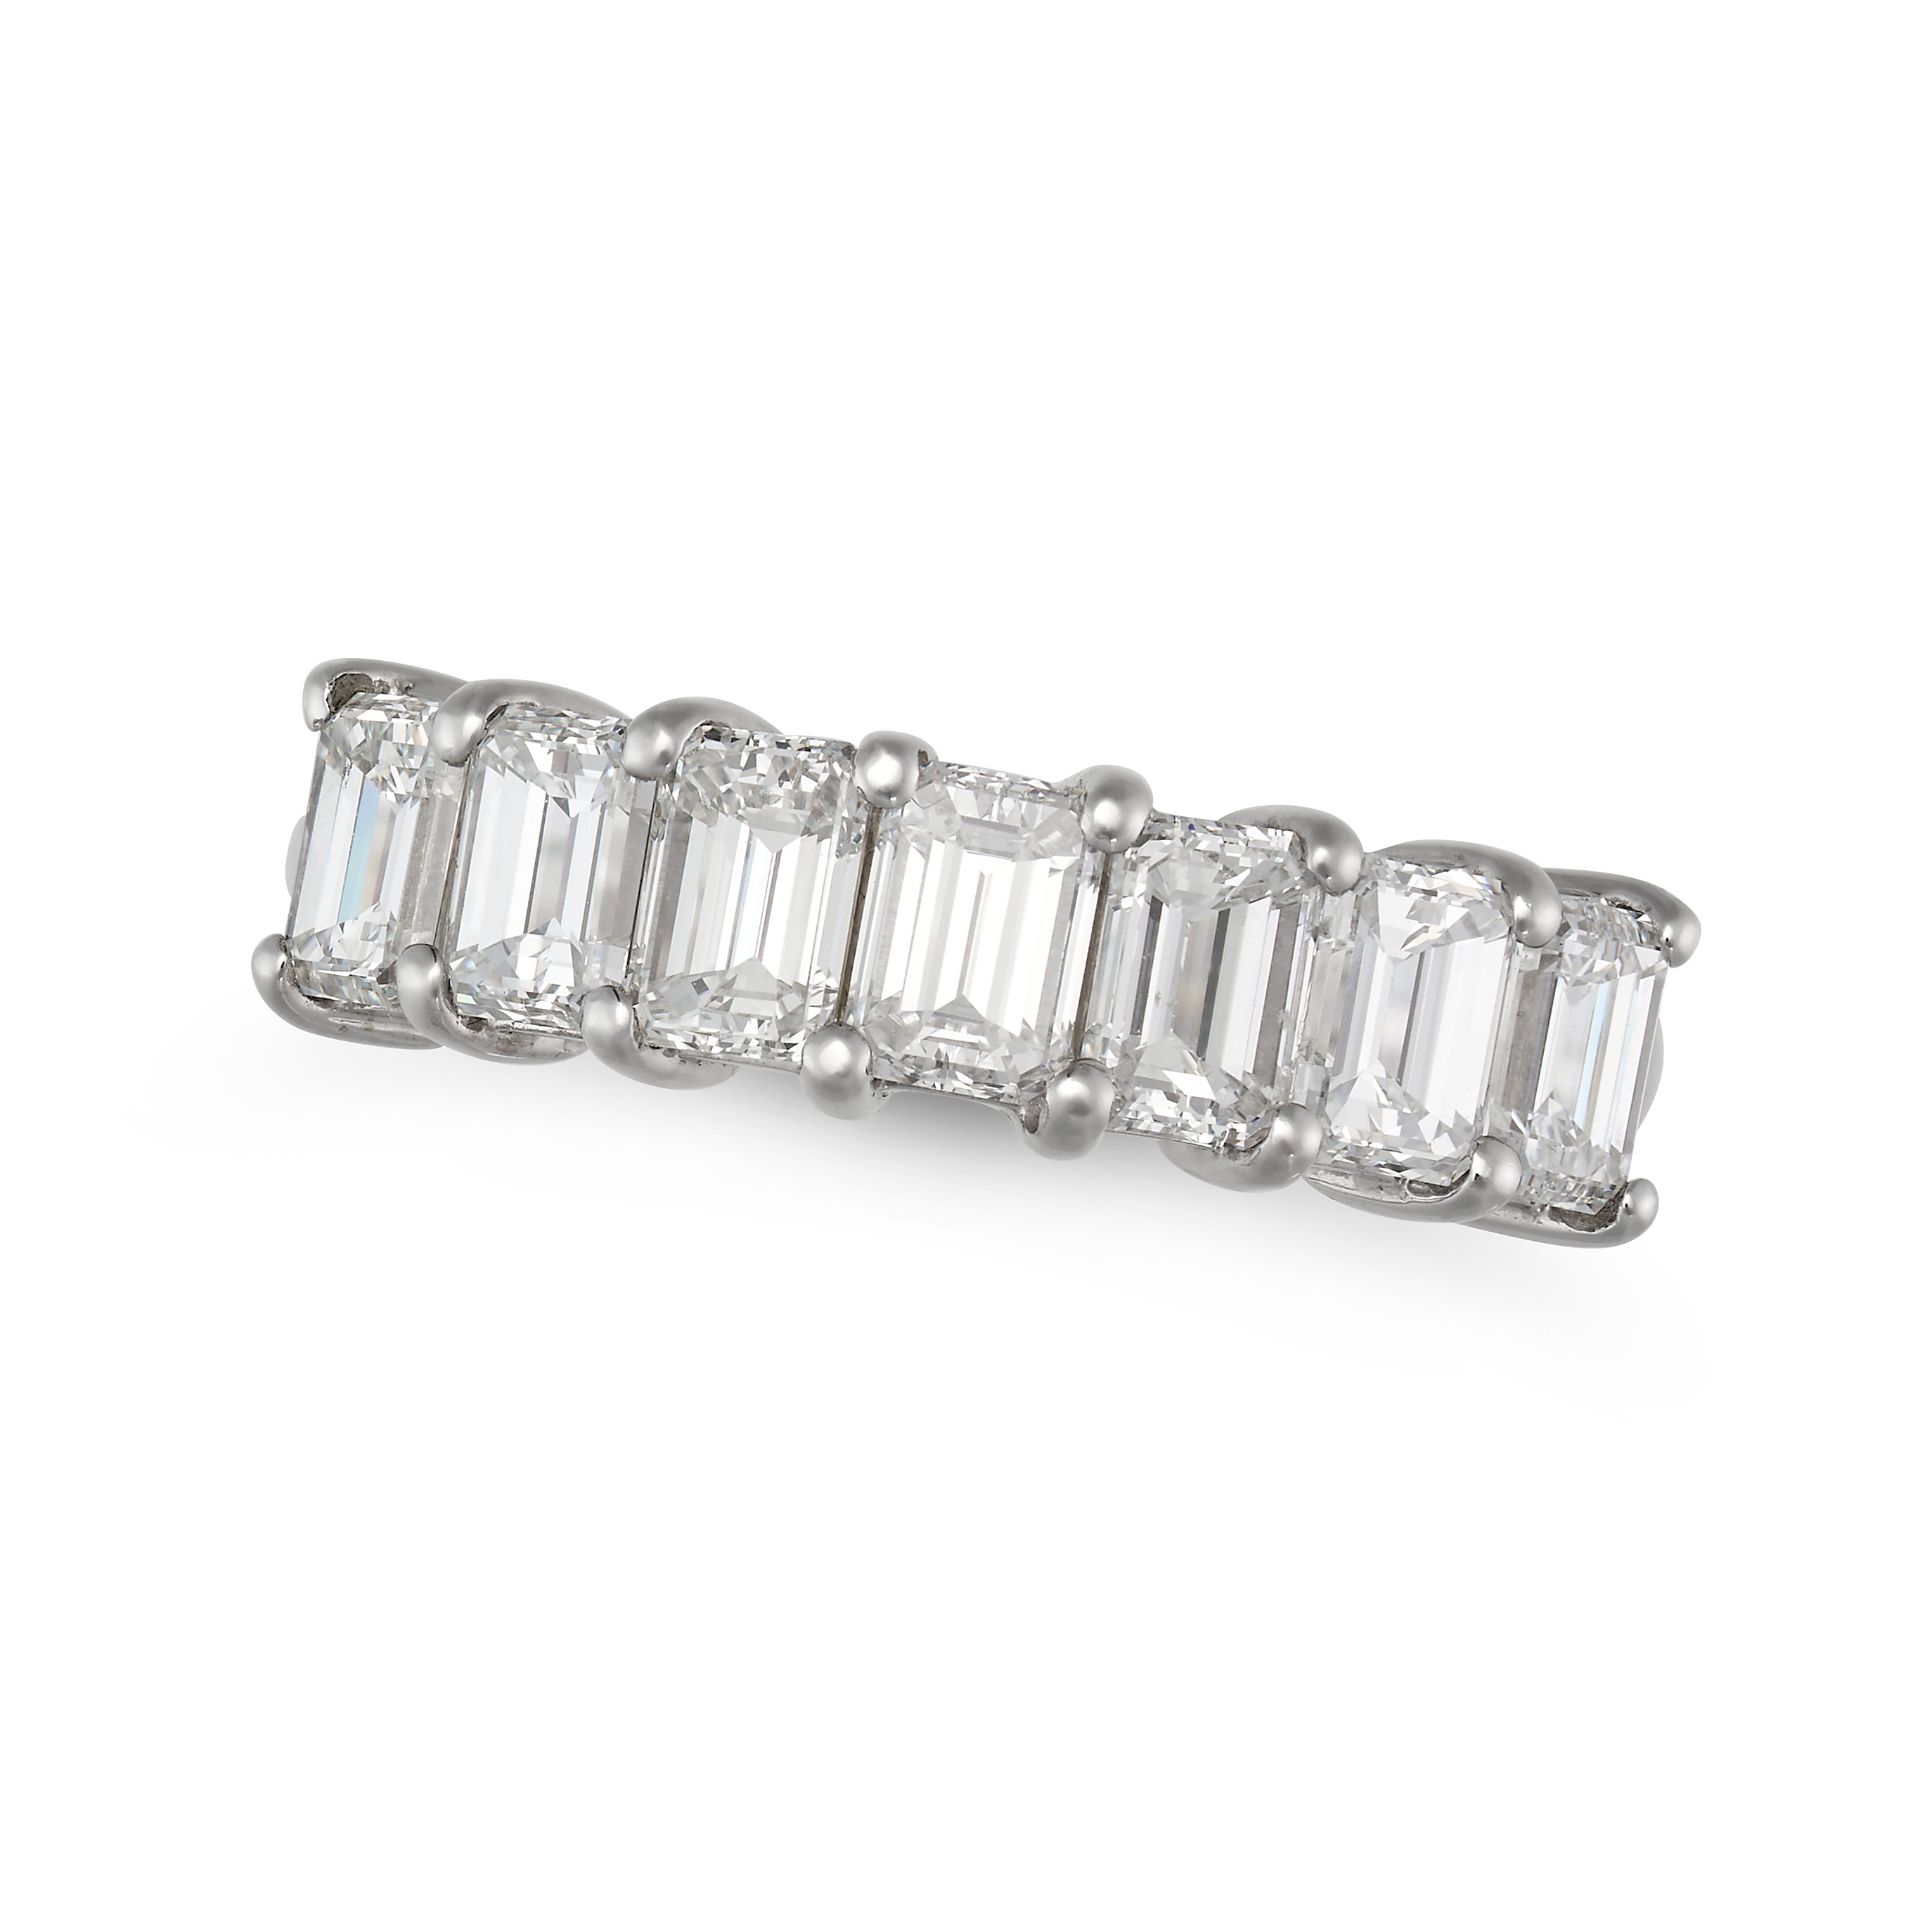 A DIAMOND HALF ETERNITY RING in 18ct white gold, half set with a row of emerald cut diamonds, the...